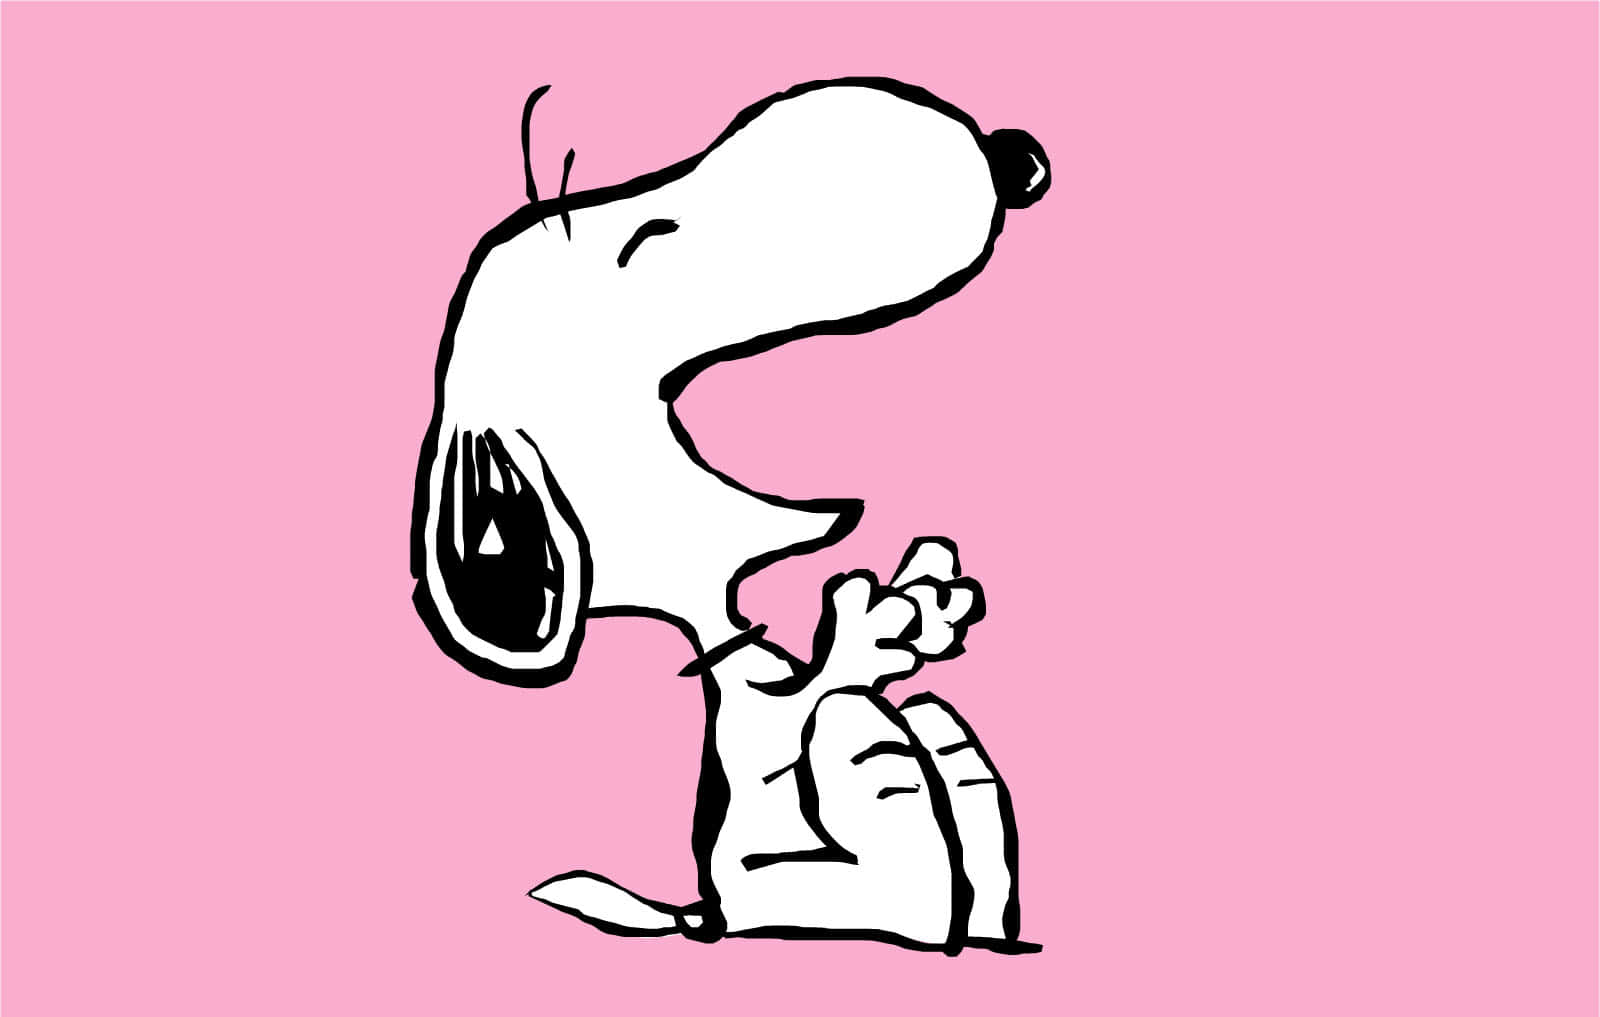 200+] Snoopy Pictures